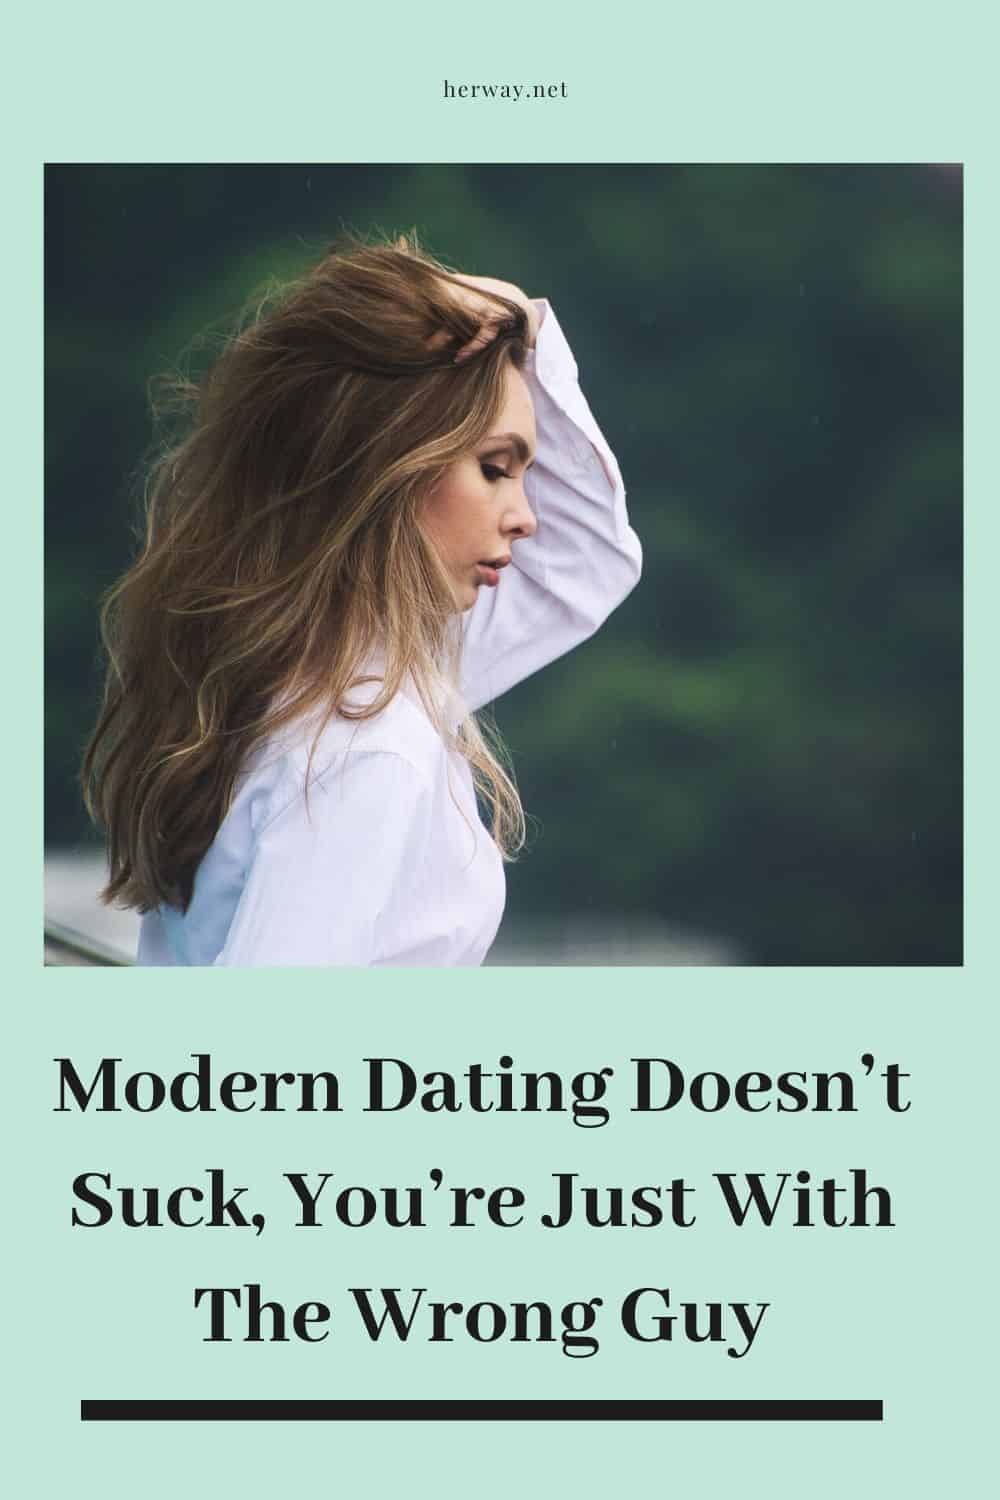 Modern Dating Doesn’t Suck, You’re Just With The Wrong Guy